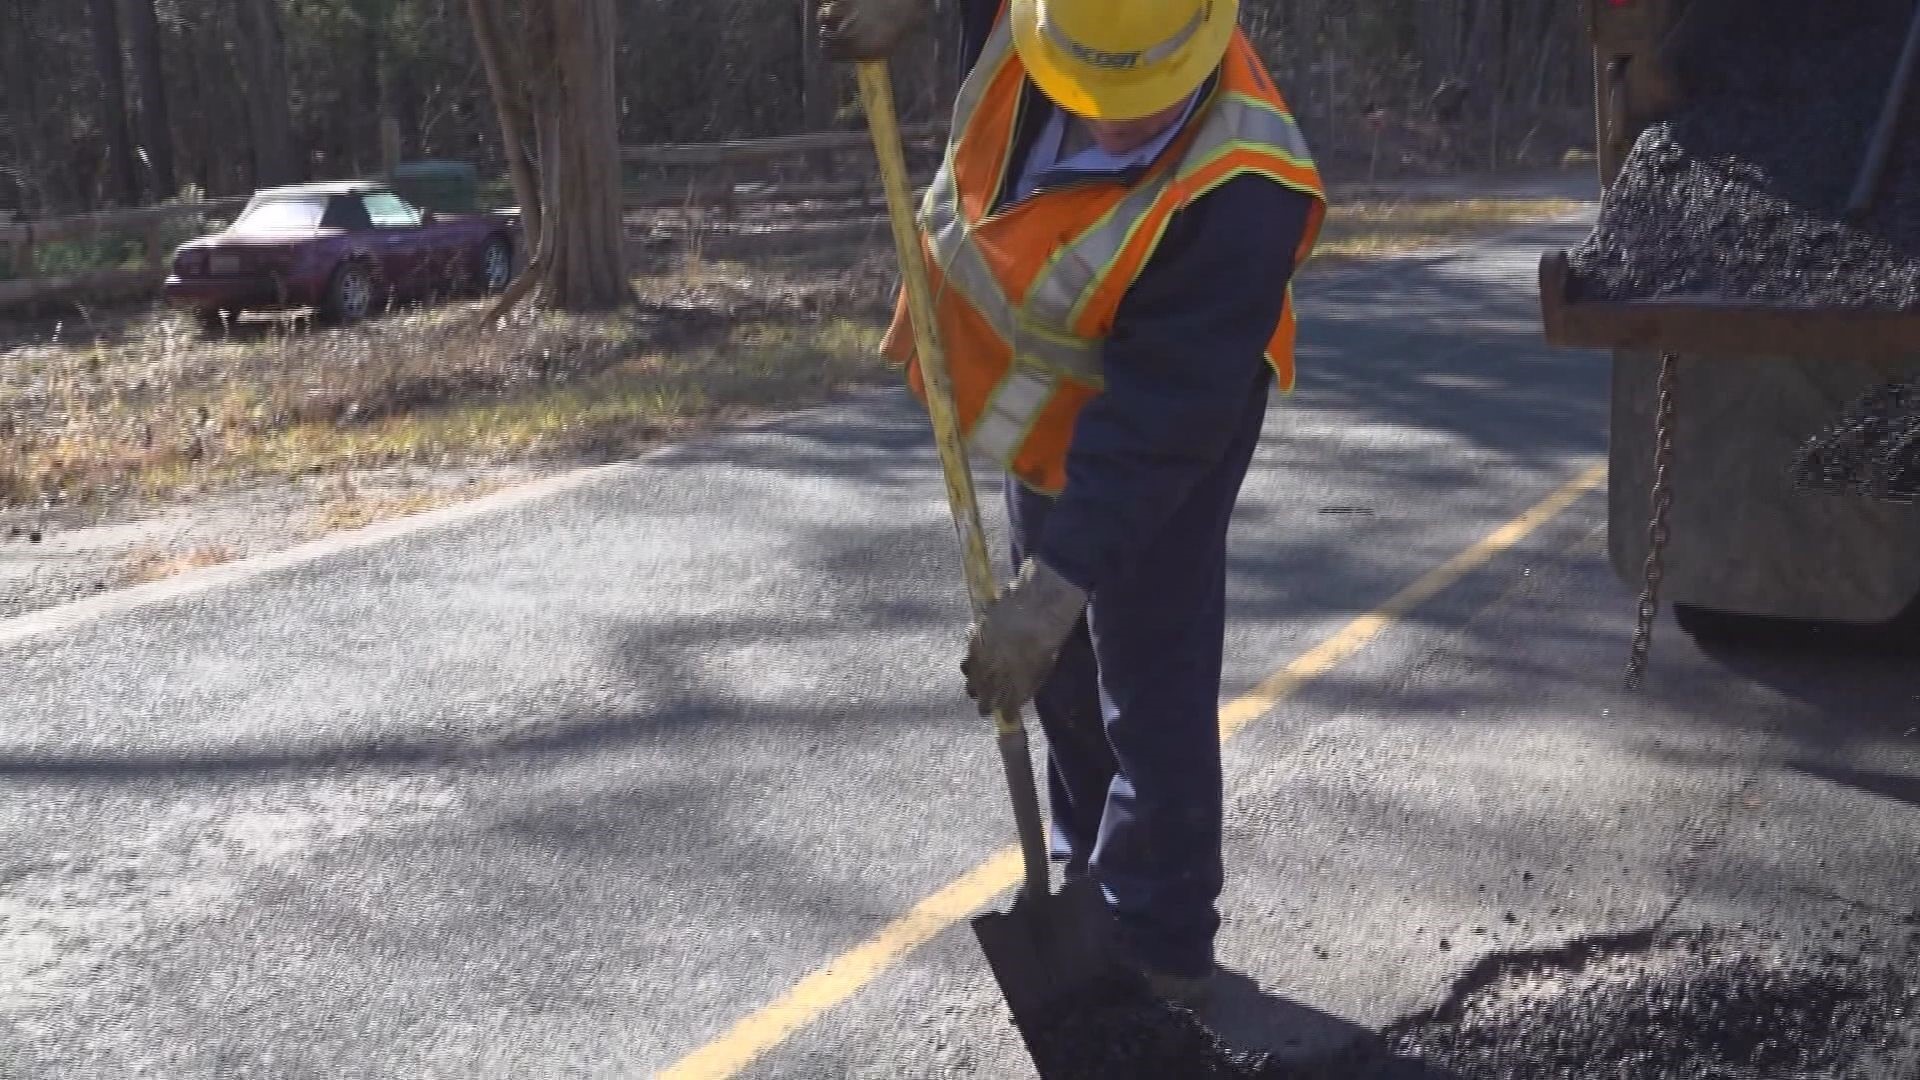 Road crews are working to repair the potholes and other damage in Sumter.